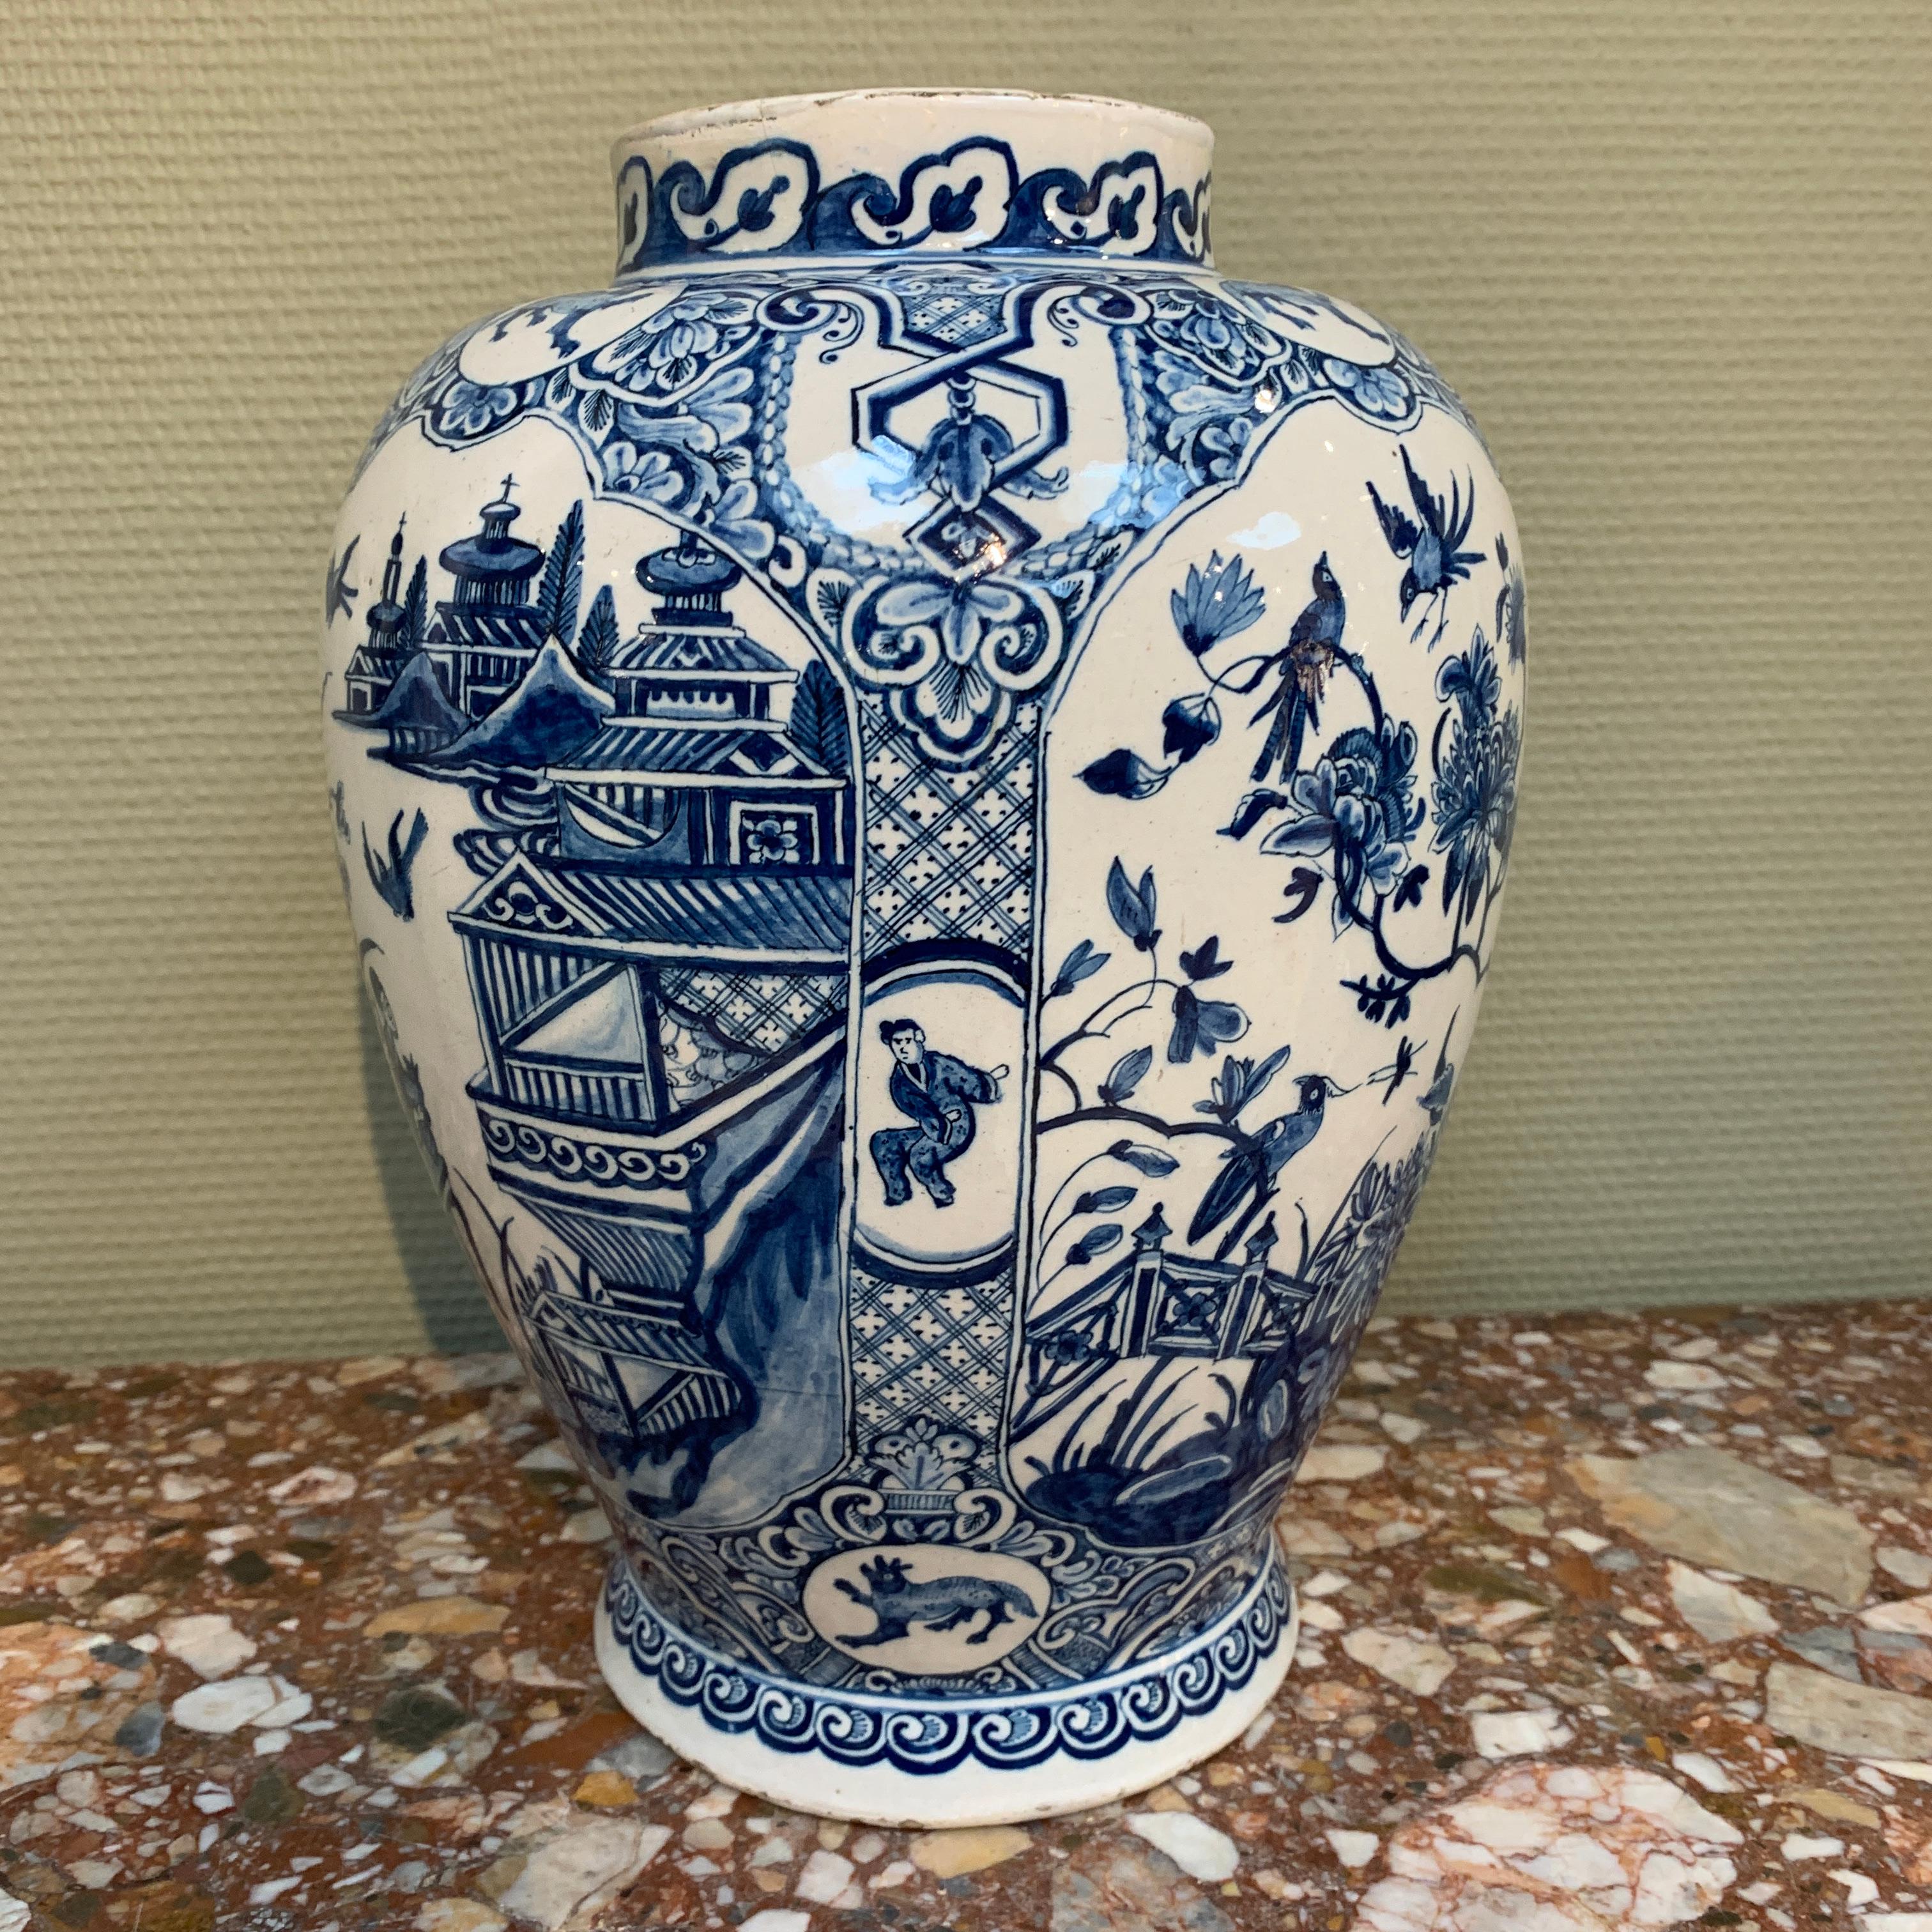 Glazed Large Dutch Delft Blue and White Chinoiserie Vase, Early 18th Century